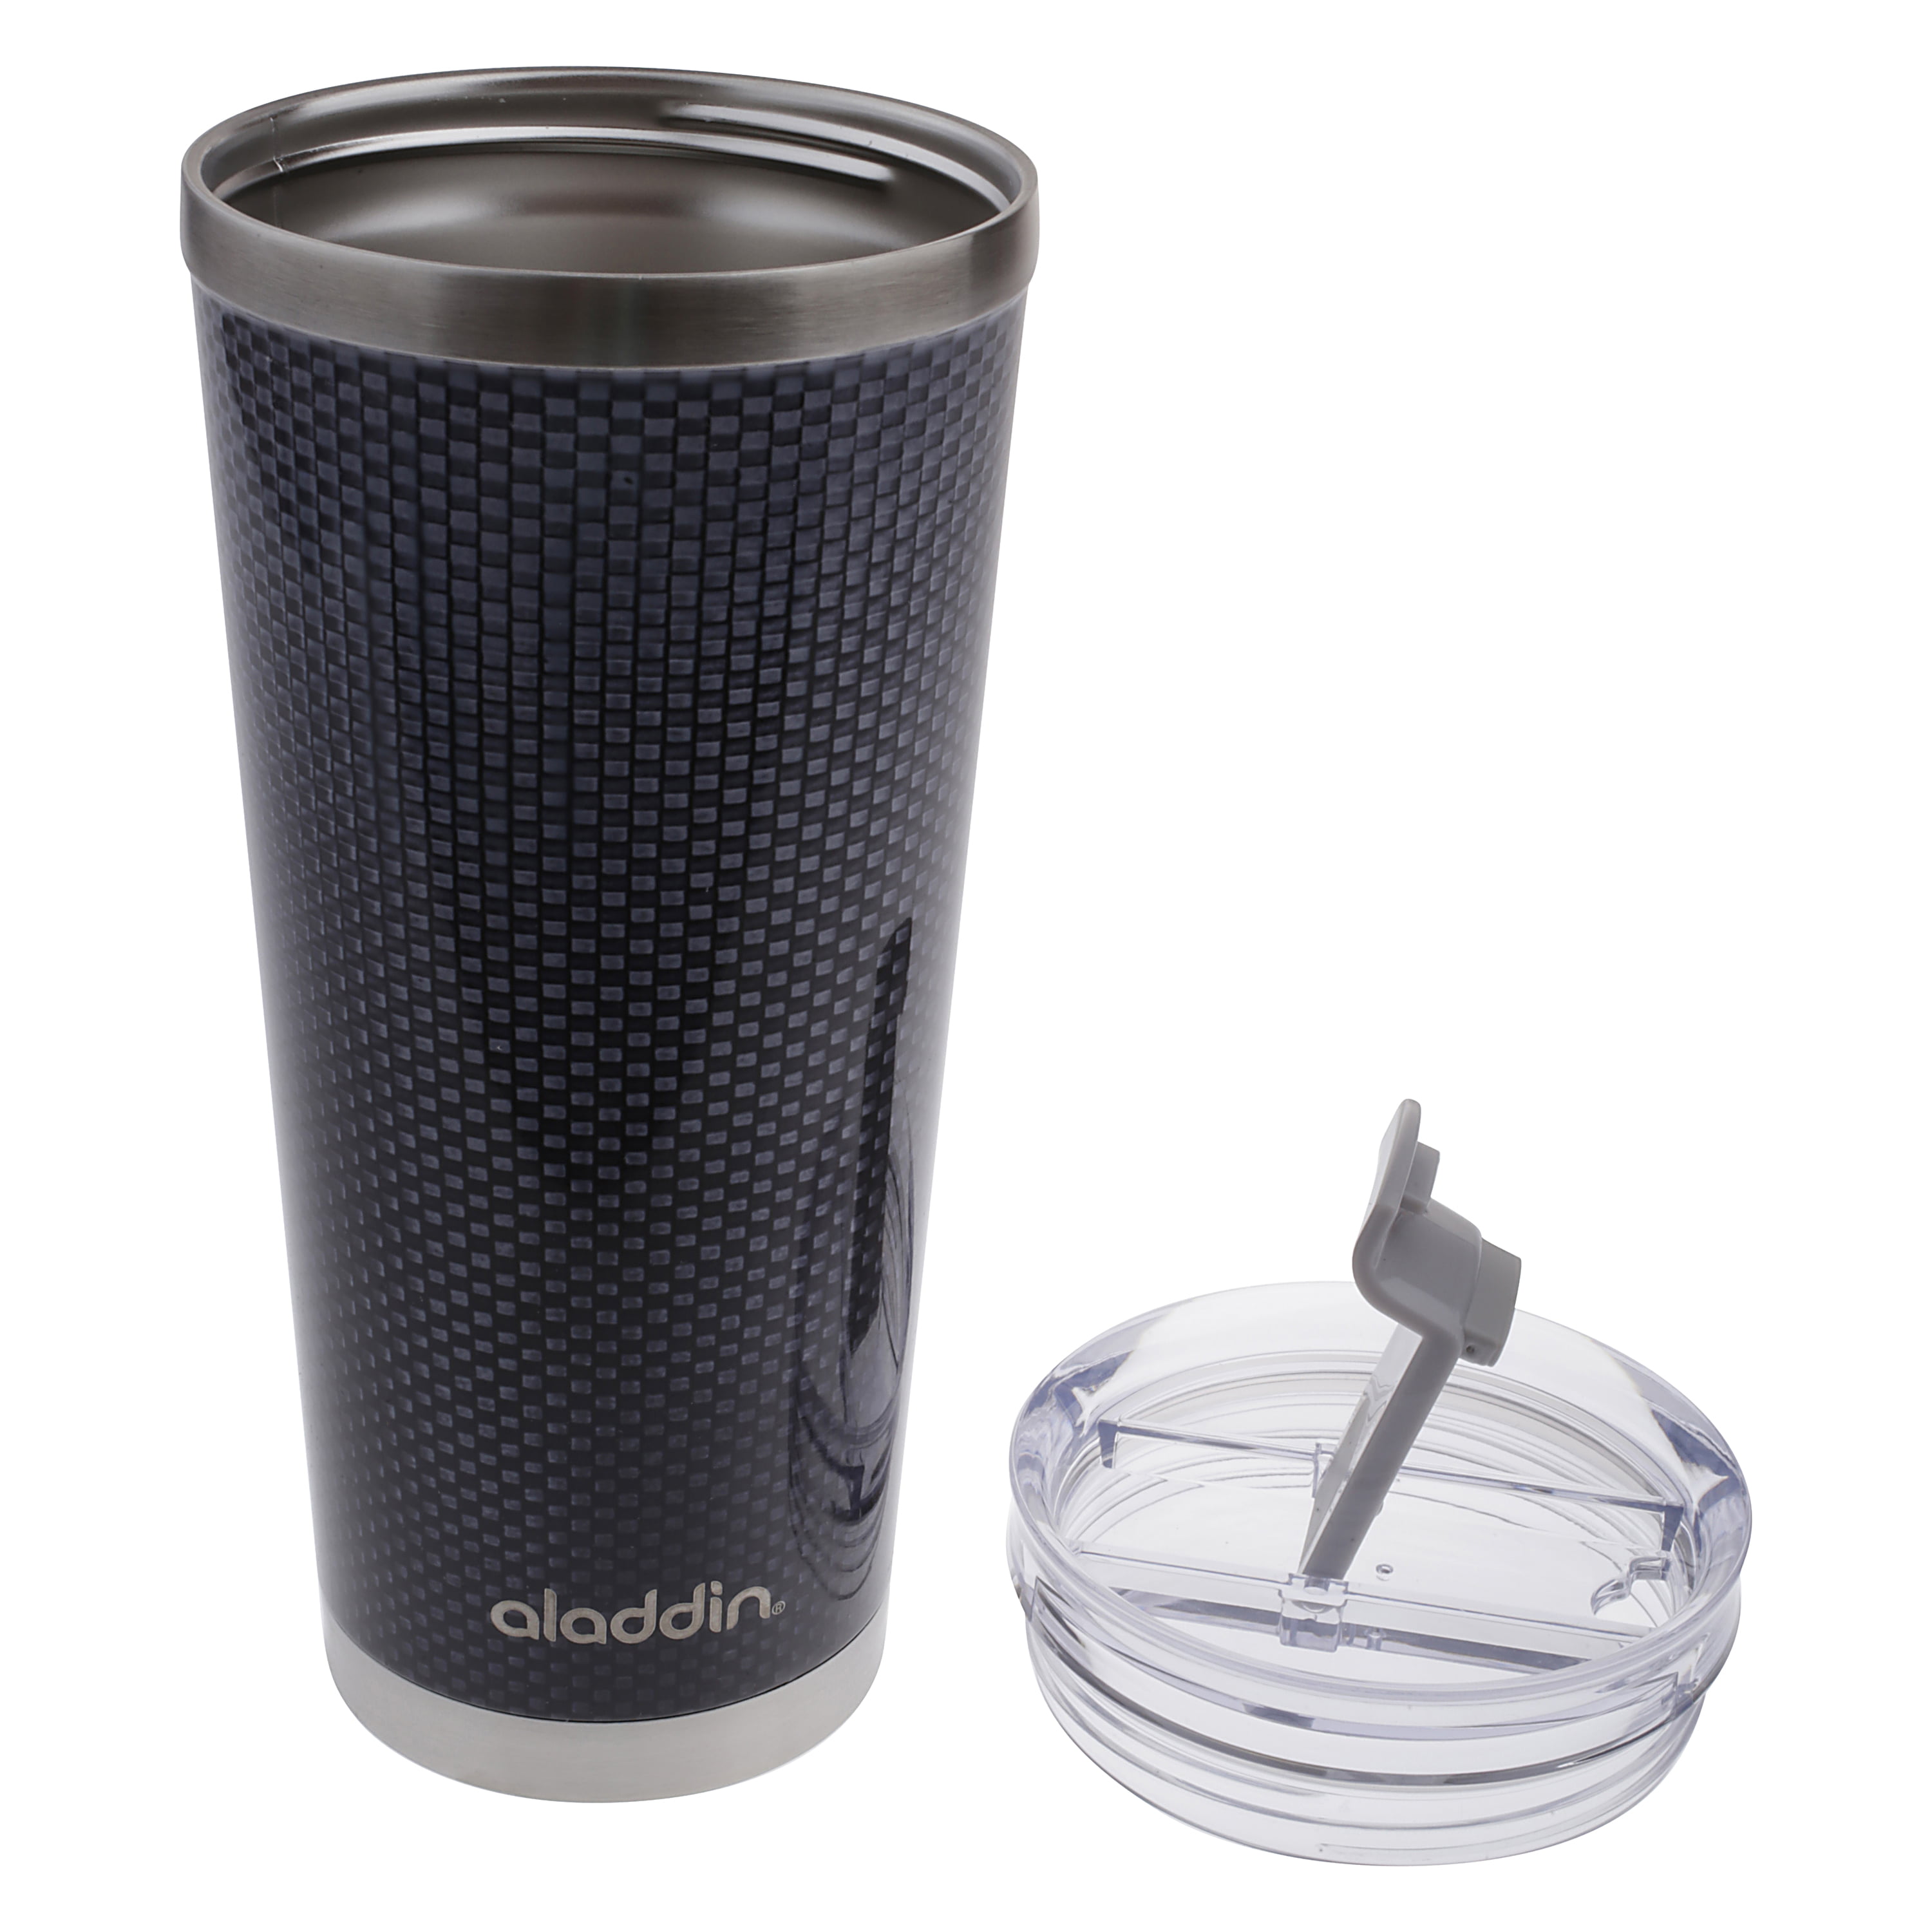 Aladdin 18 oz Stainless Steel Tumbler Cups Set Of 2